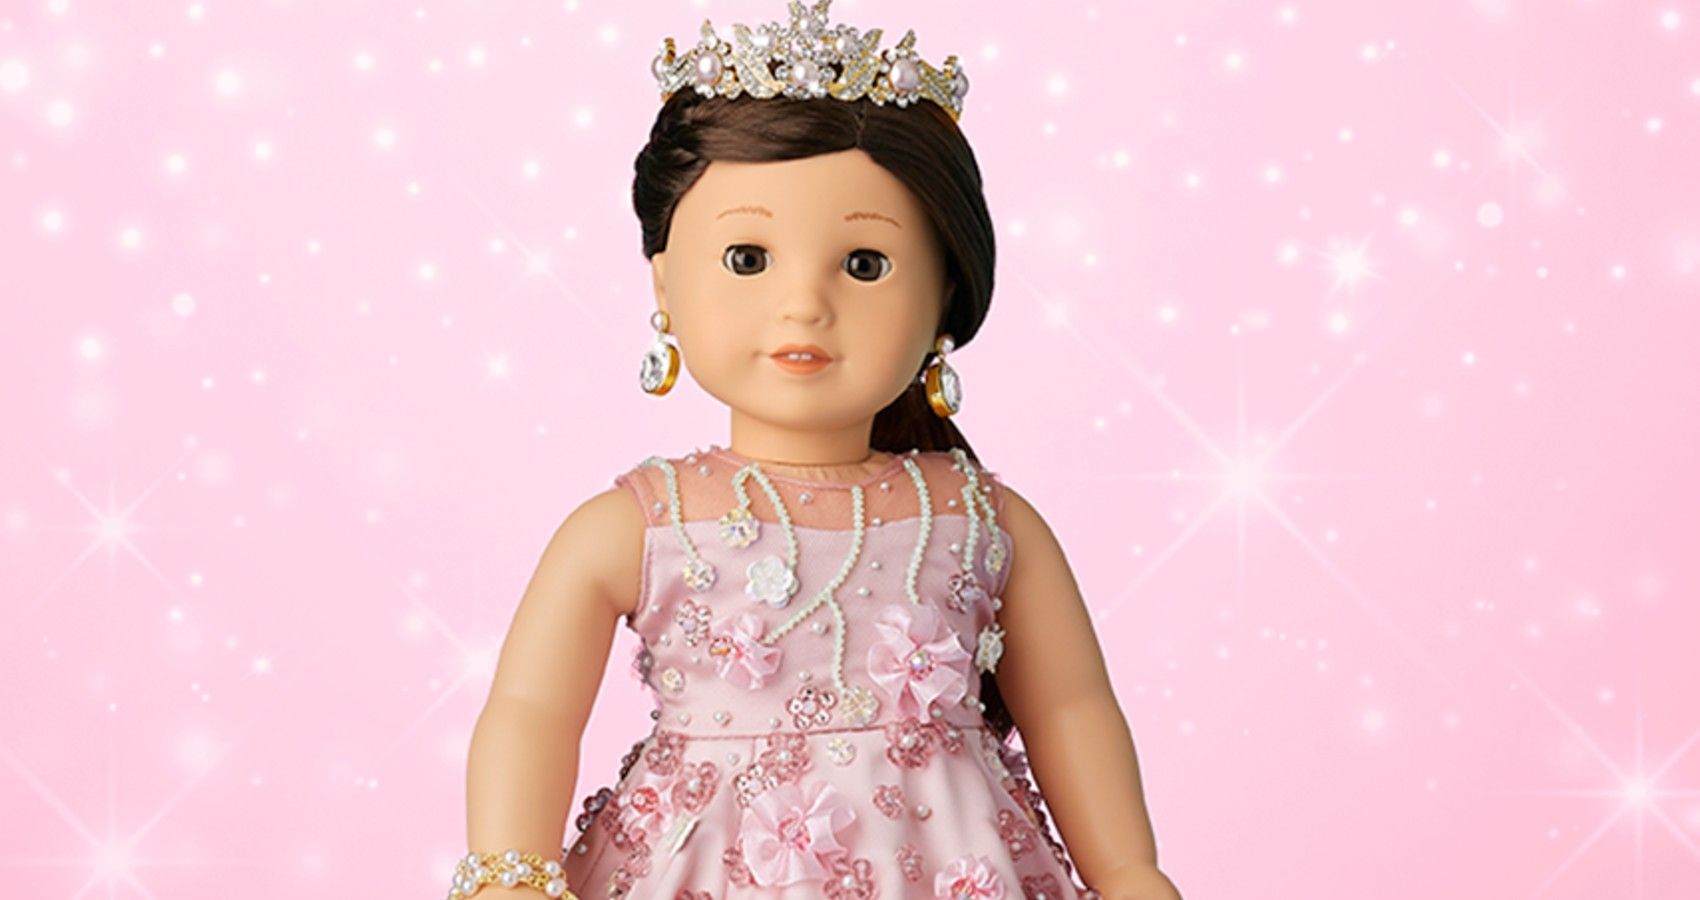 An American Girl doll with swarovski crystals all over it